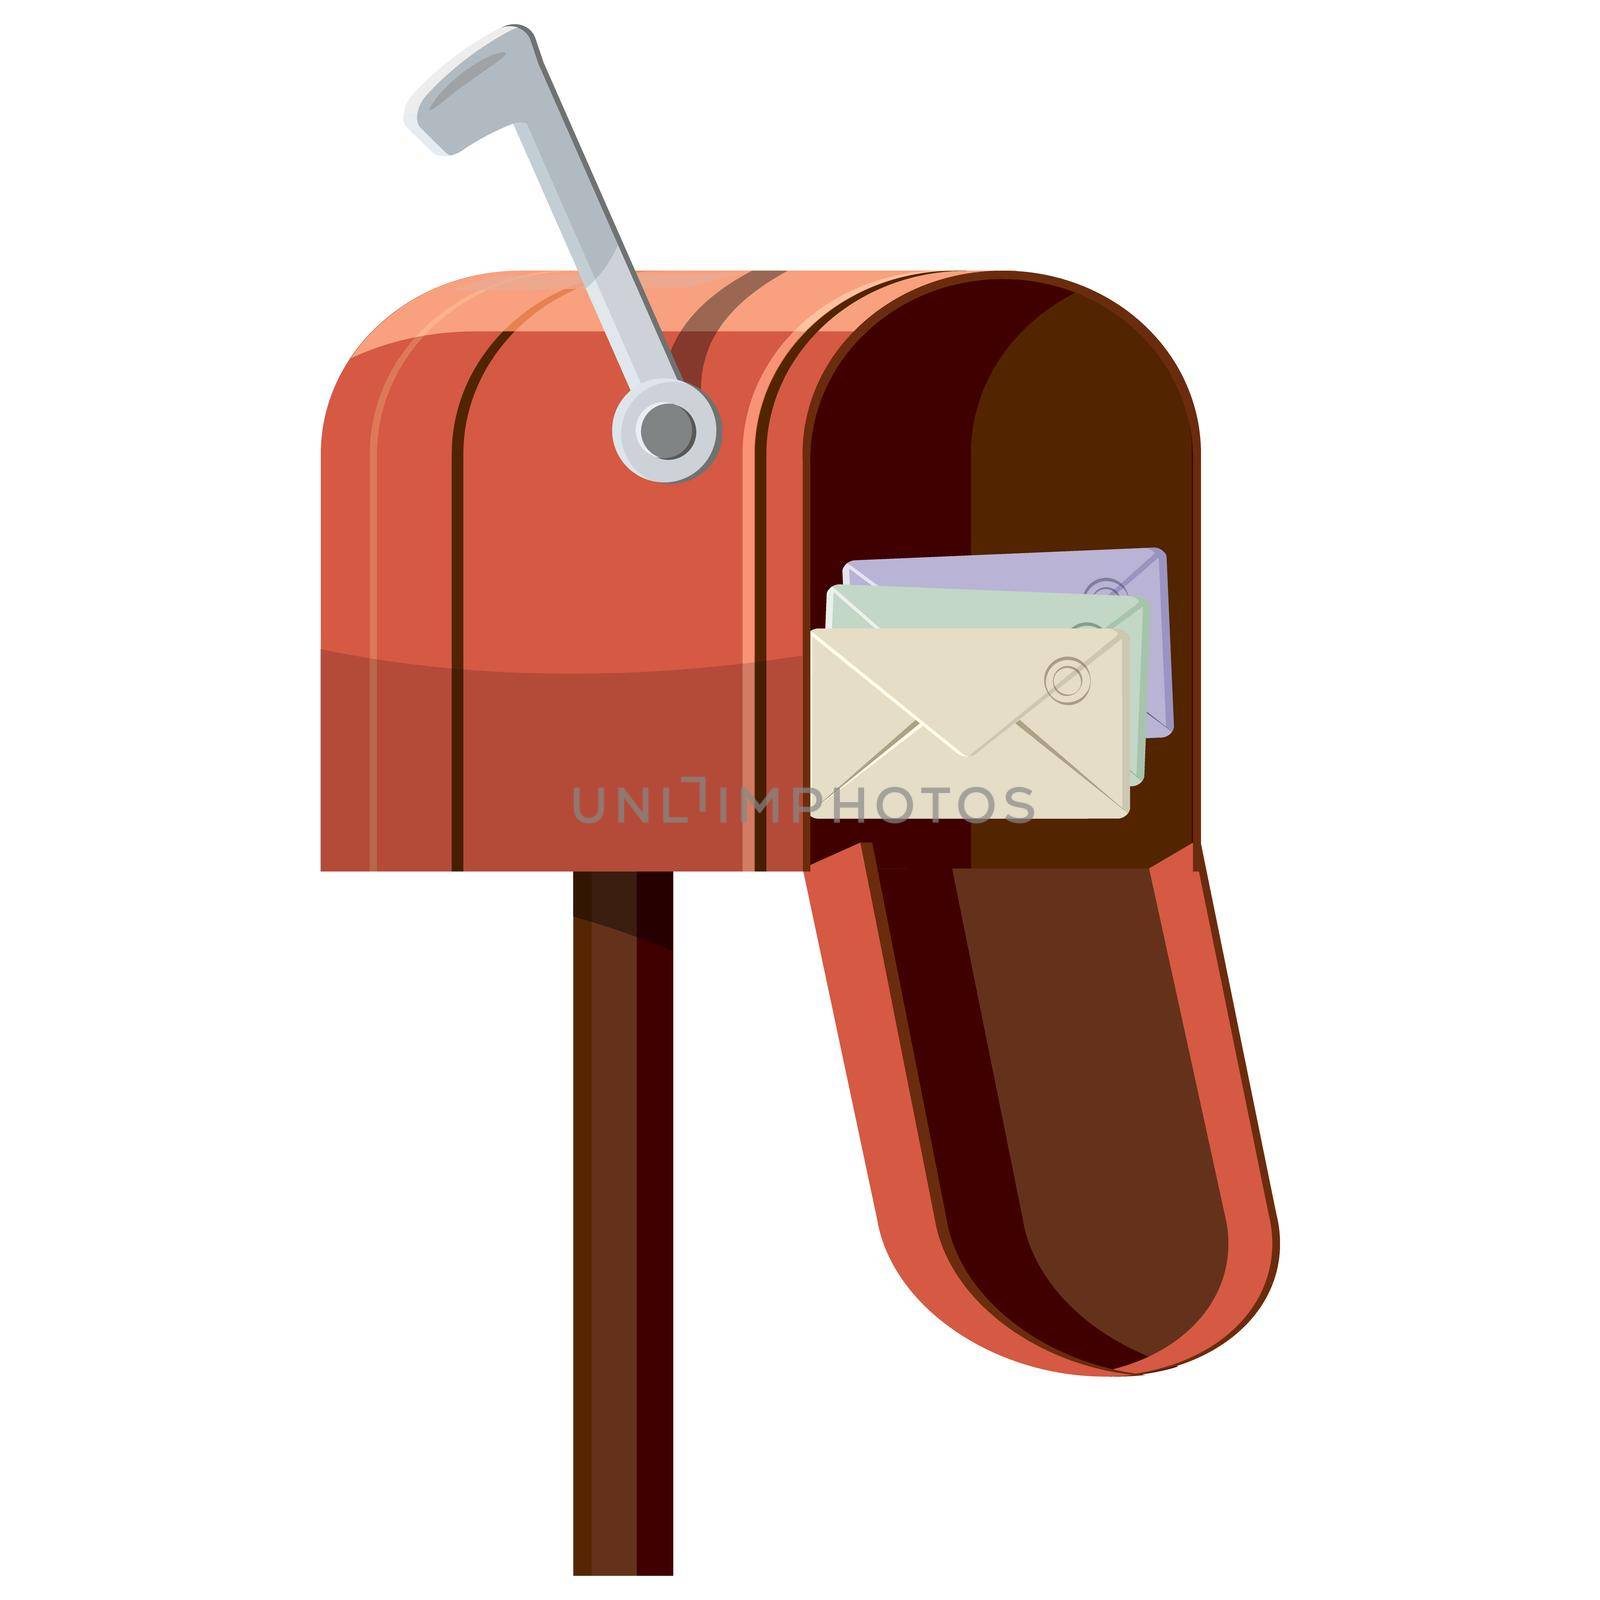 Mailbox icon in cartoon style isolated on white background